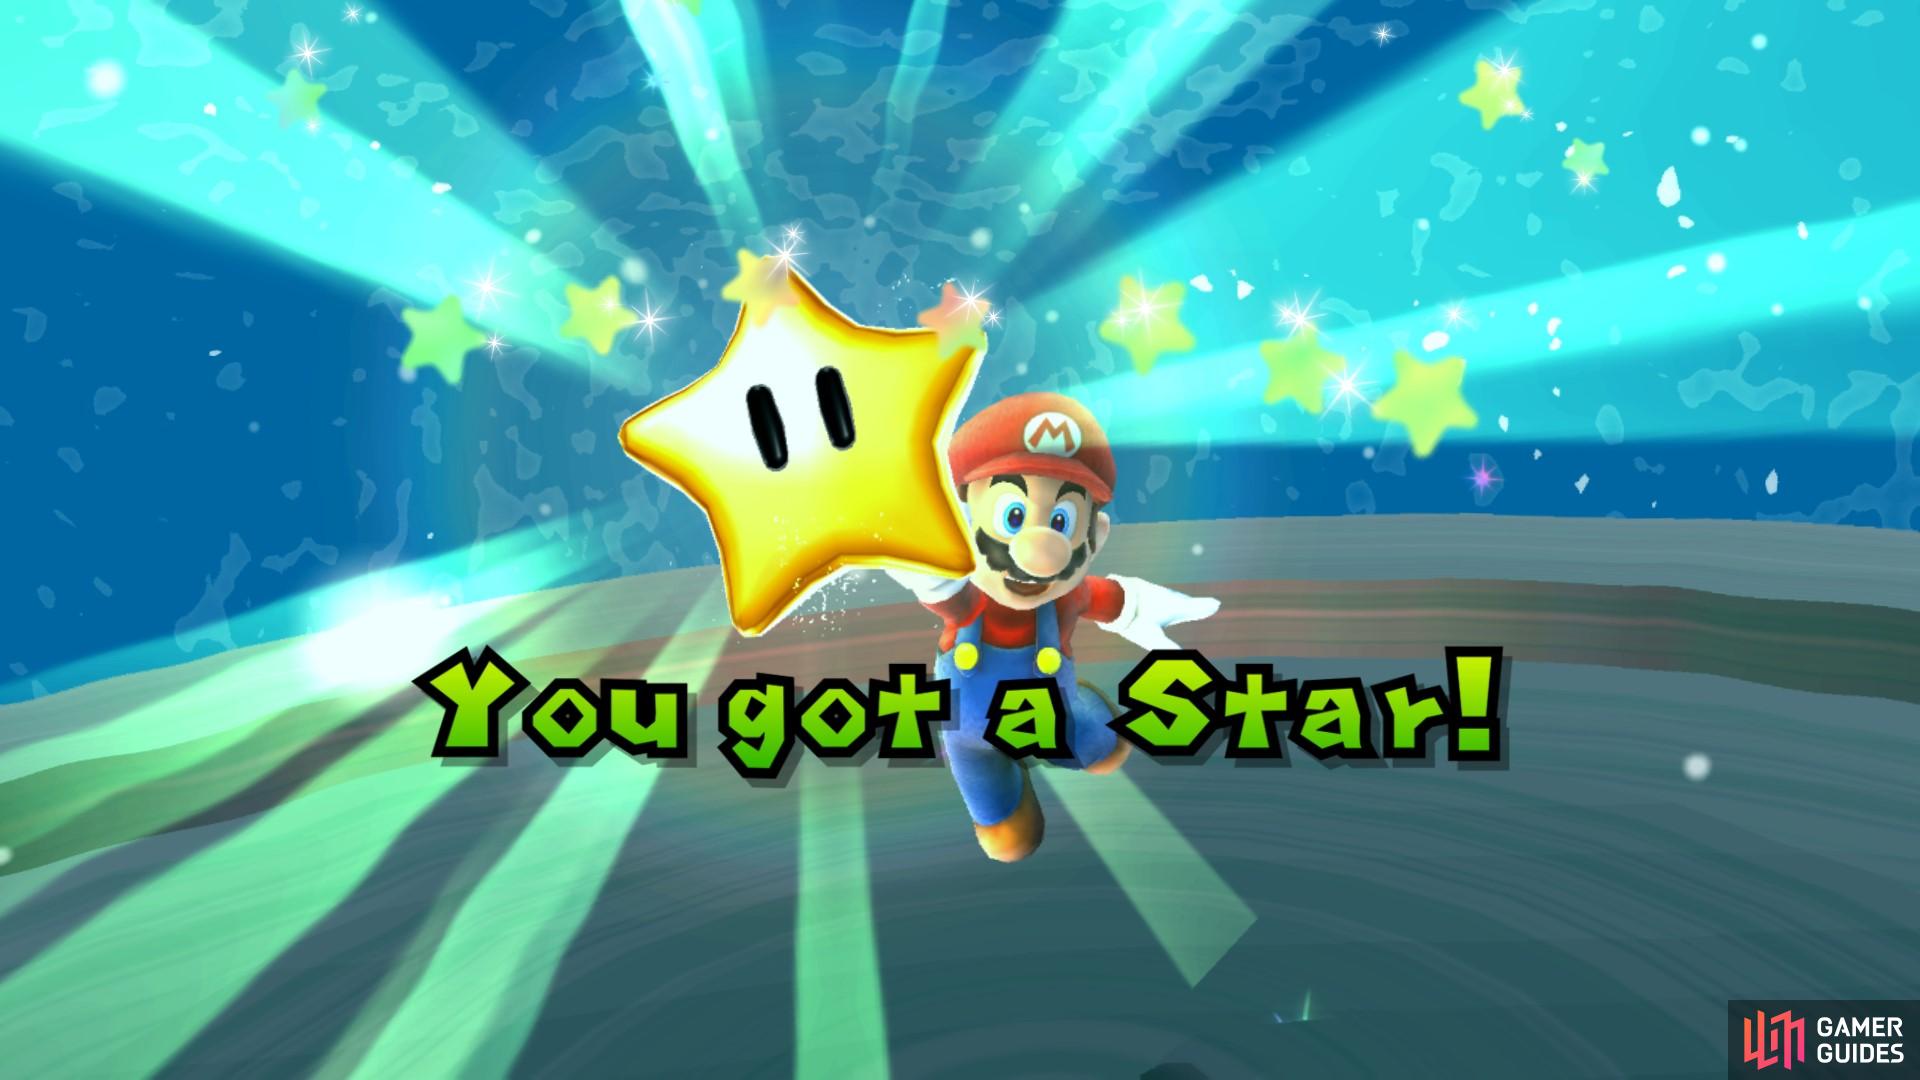 so you can grab the star!